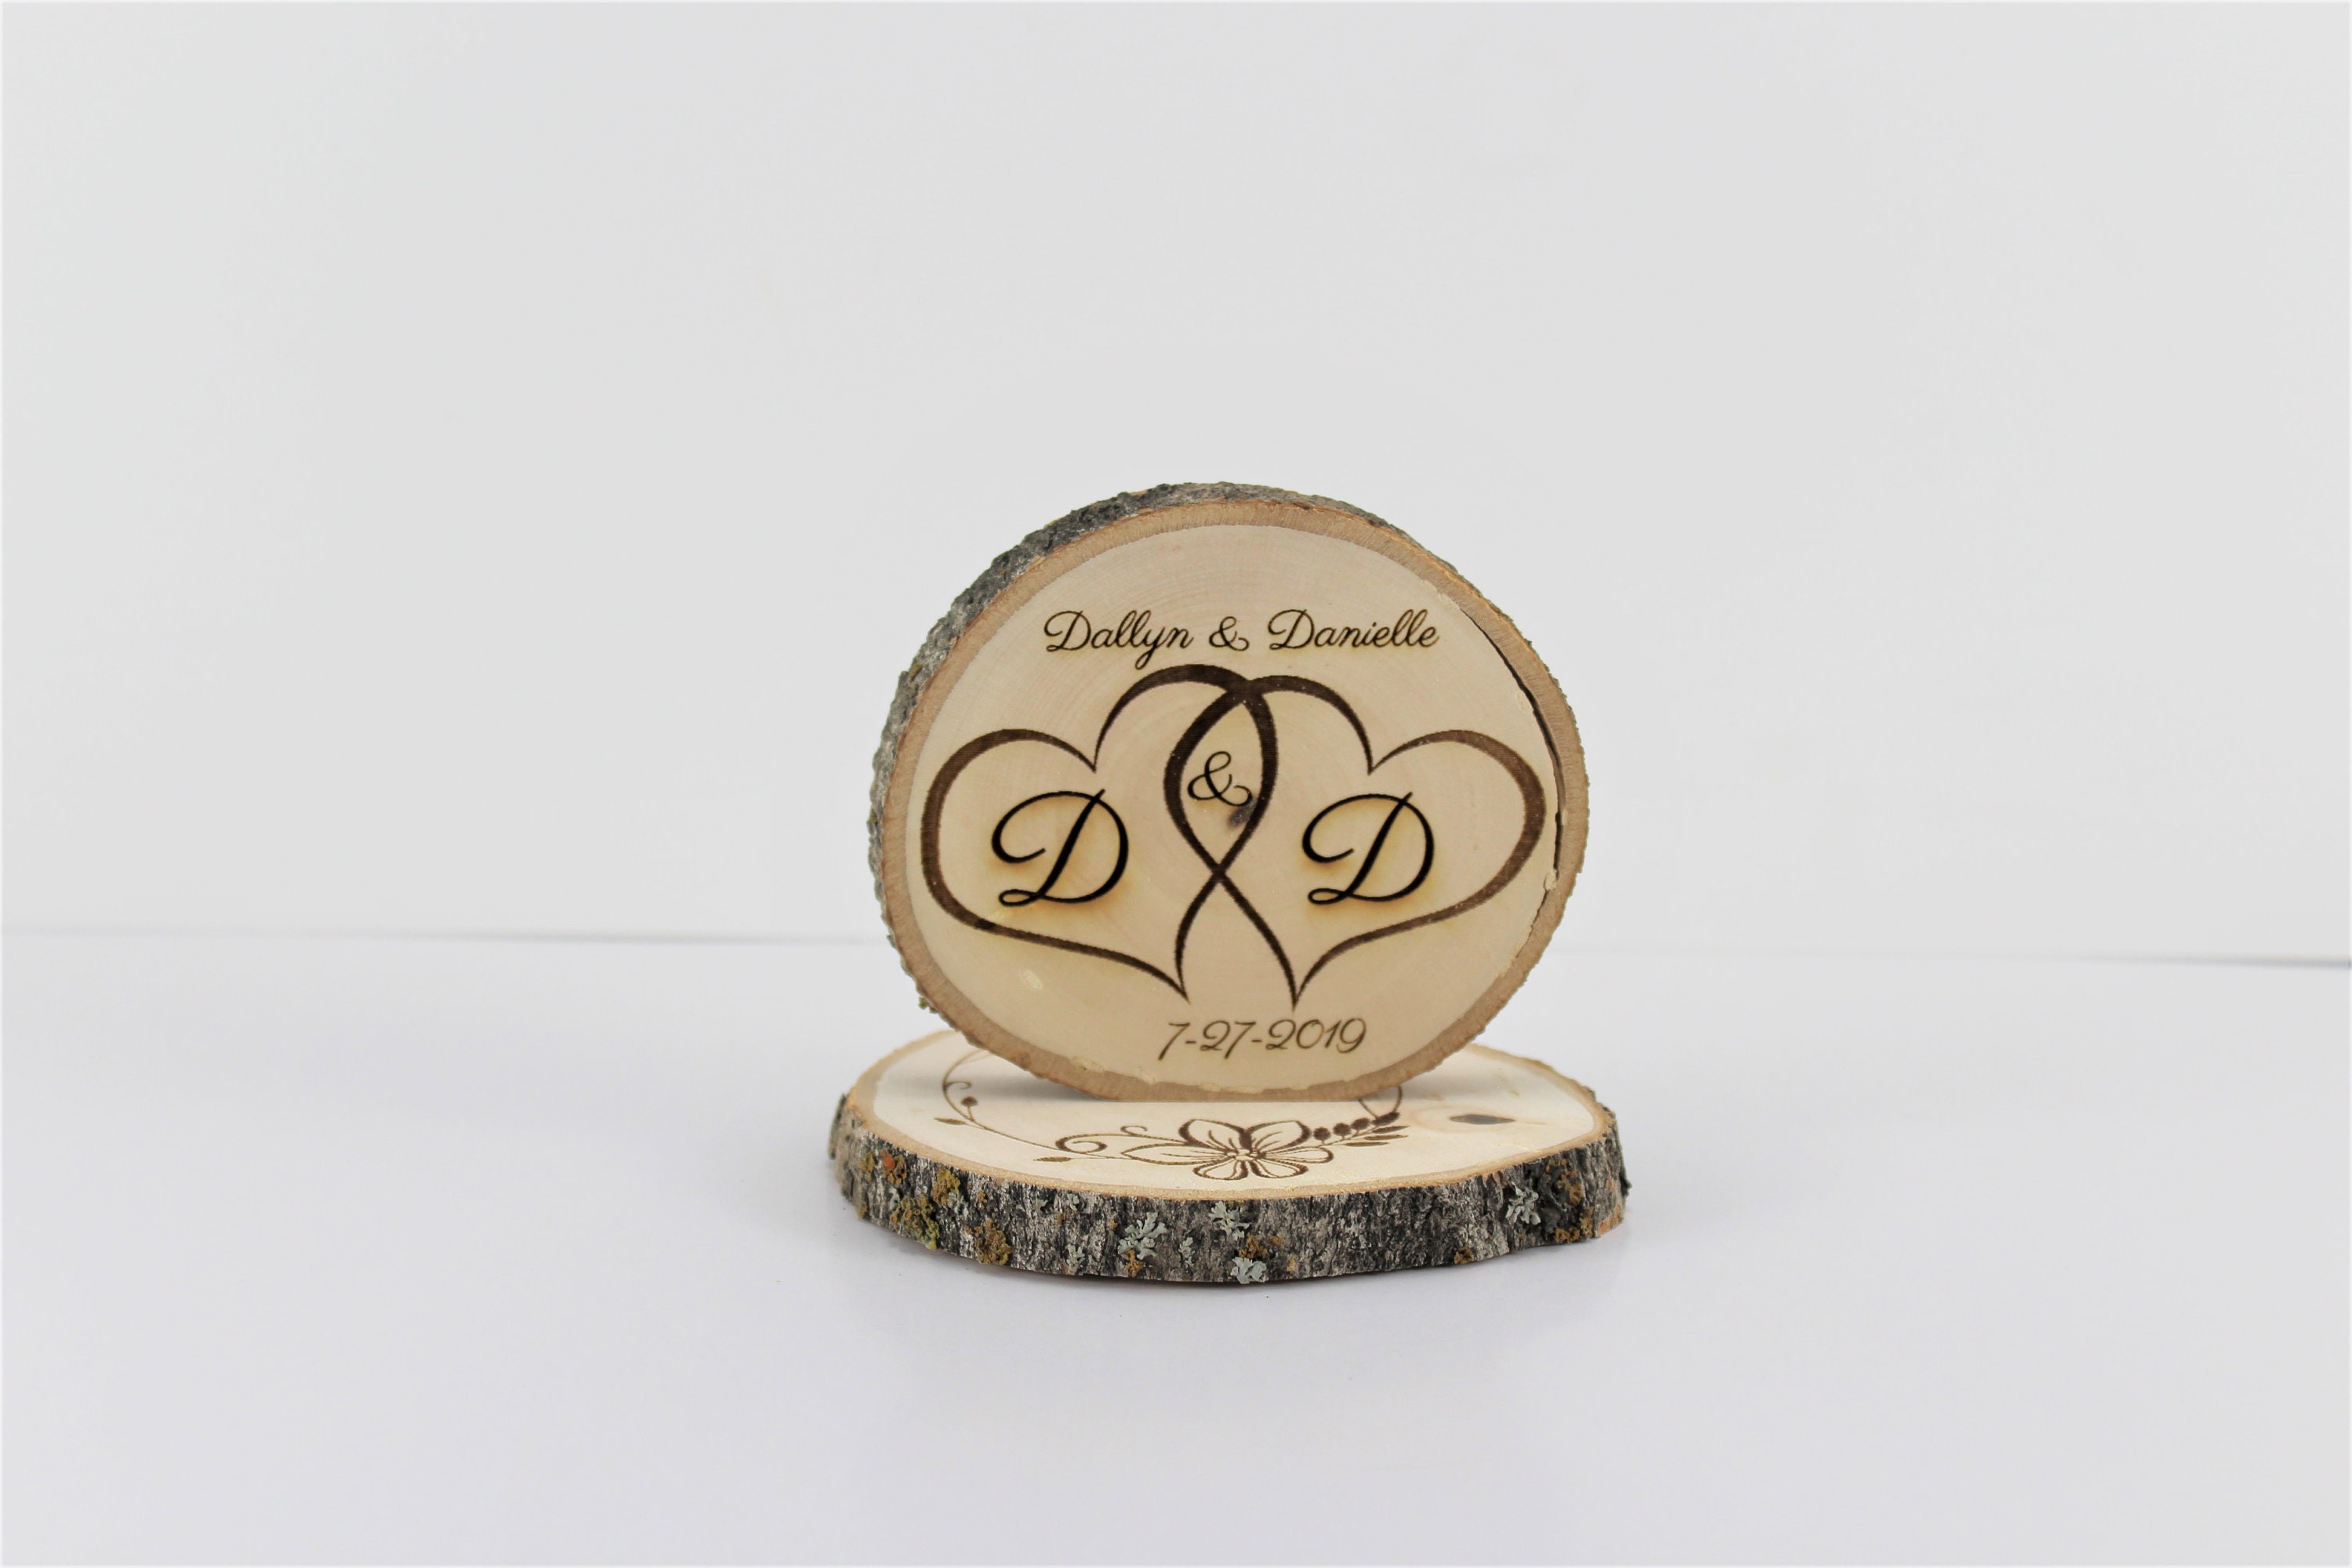 Wood Log Centerpieces – Etched In Time Engraving